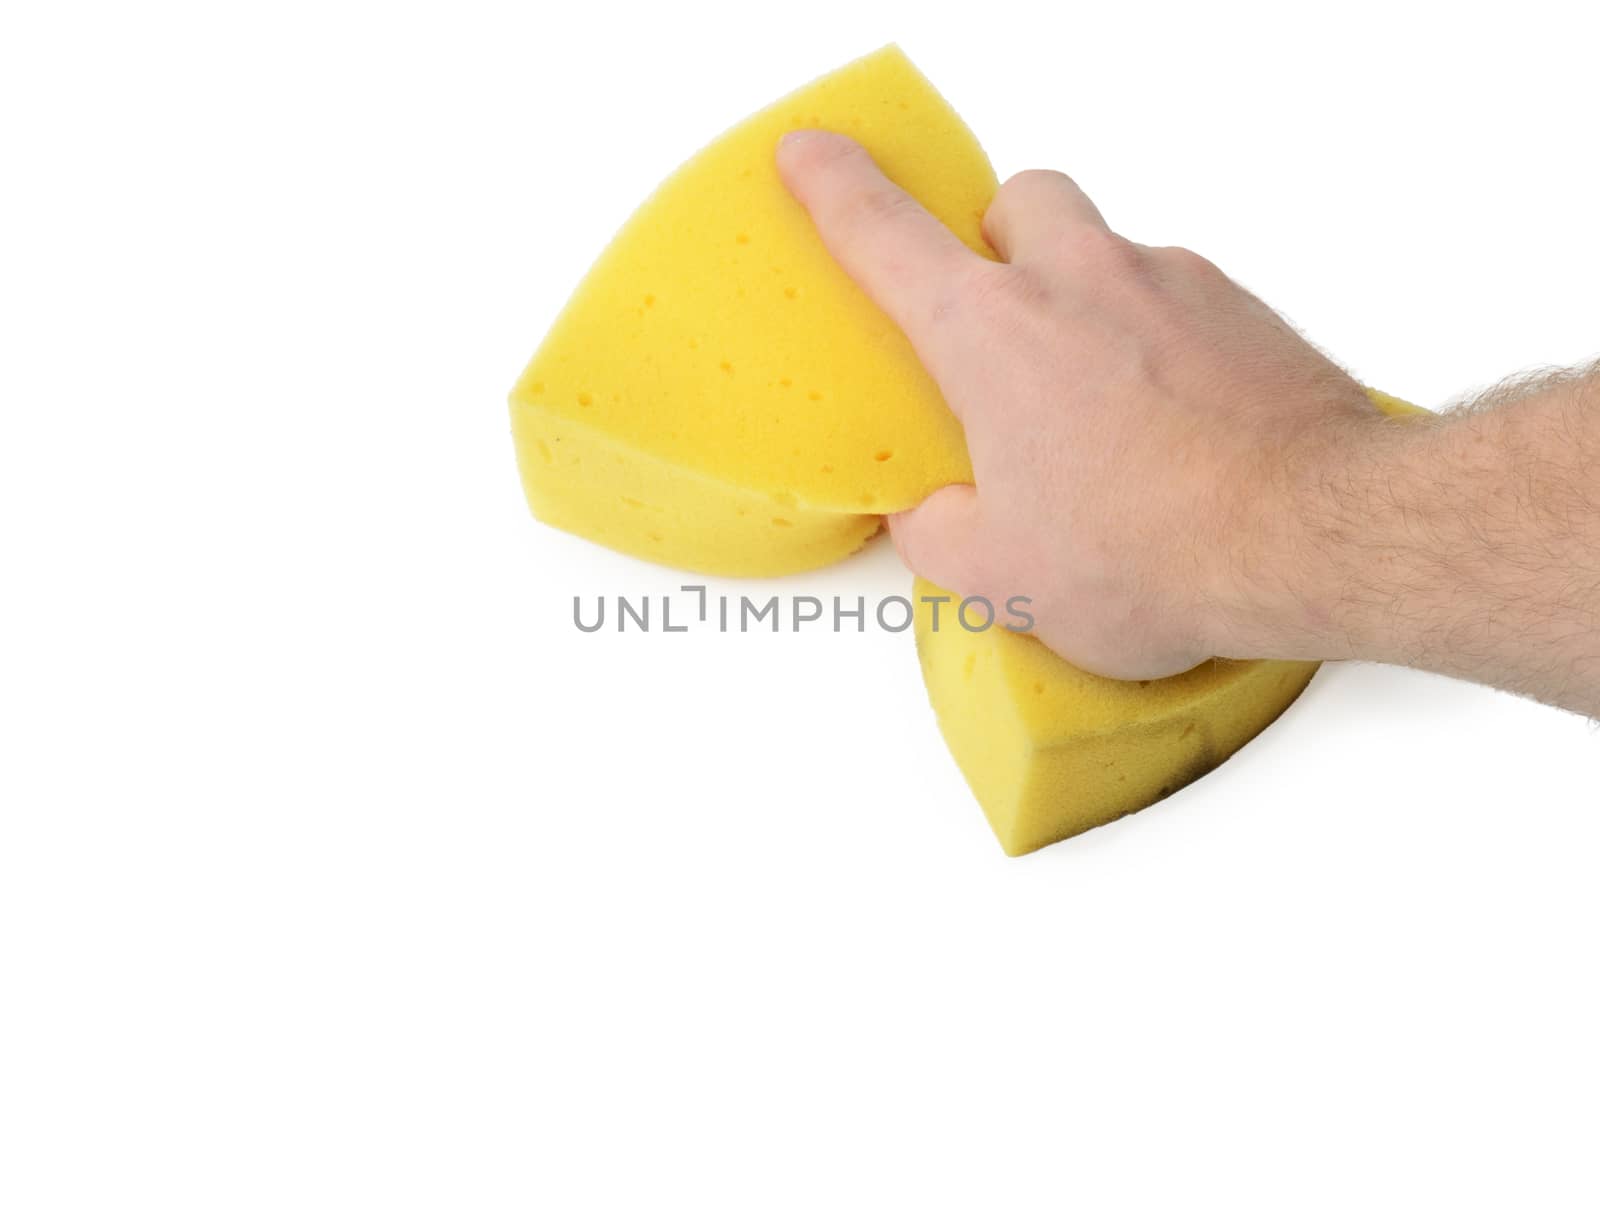 Hand holding a sponge wiping a white surface